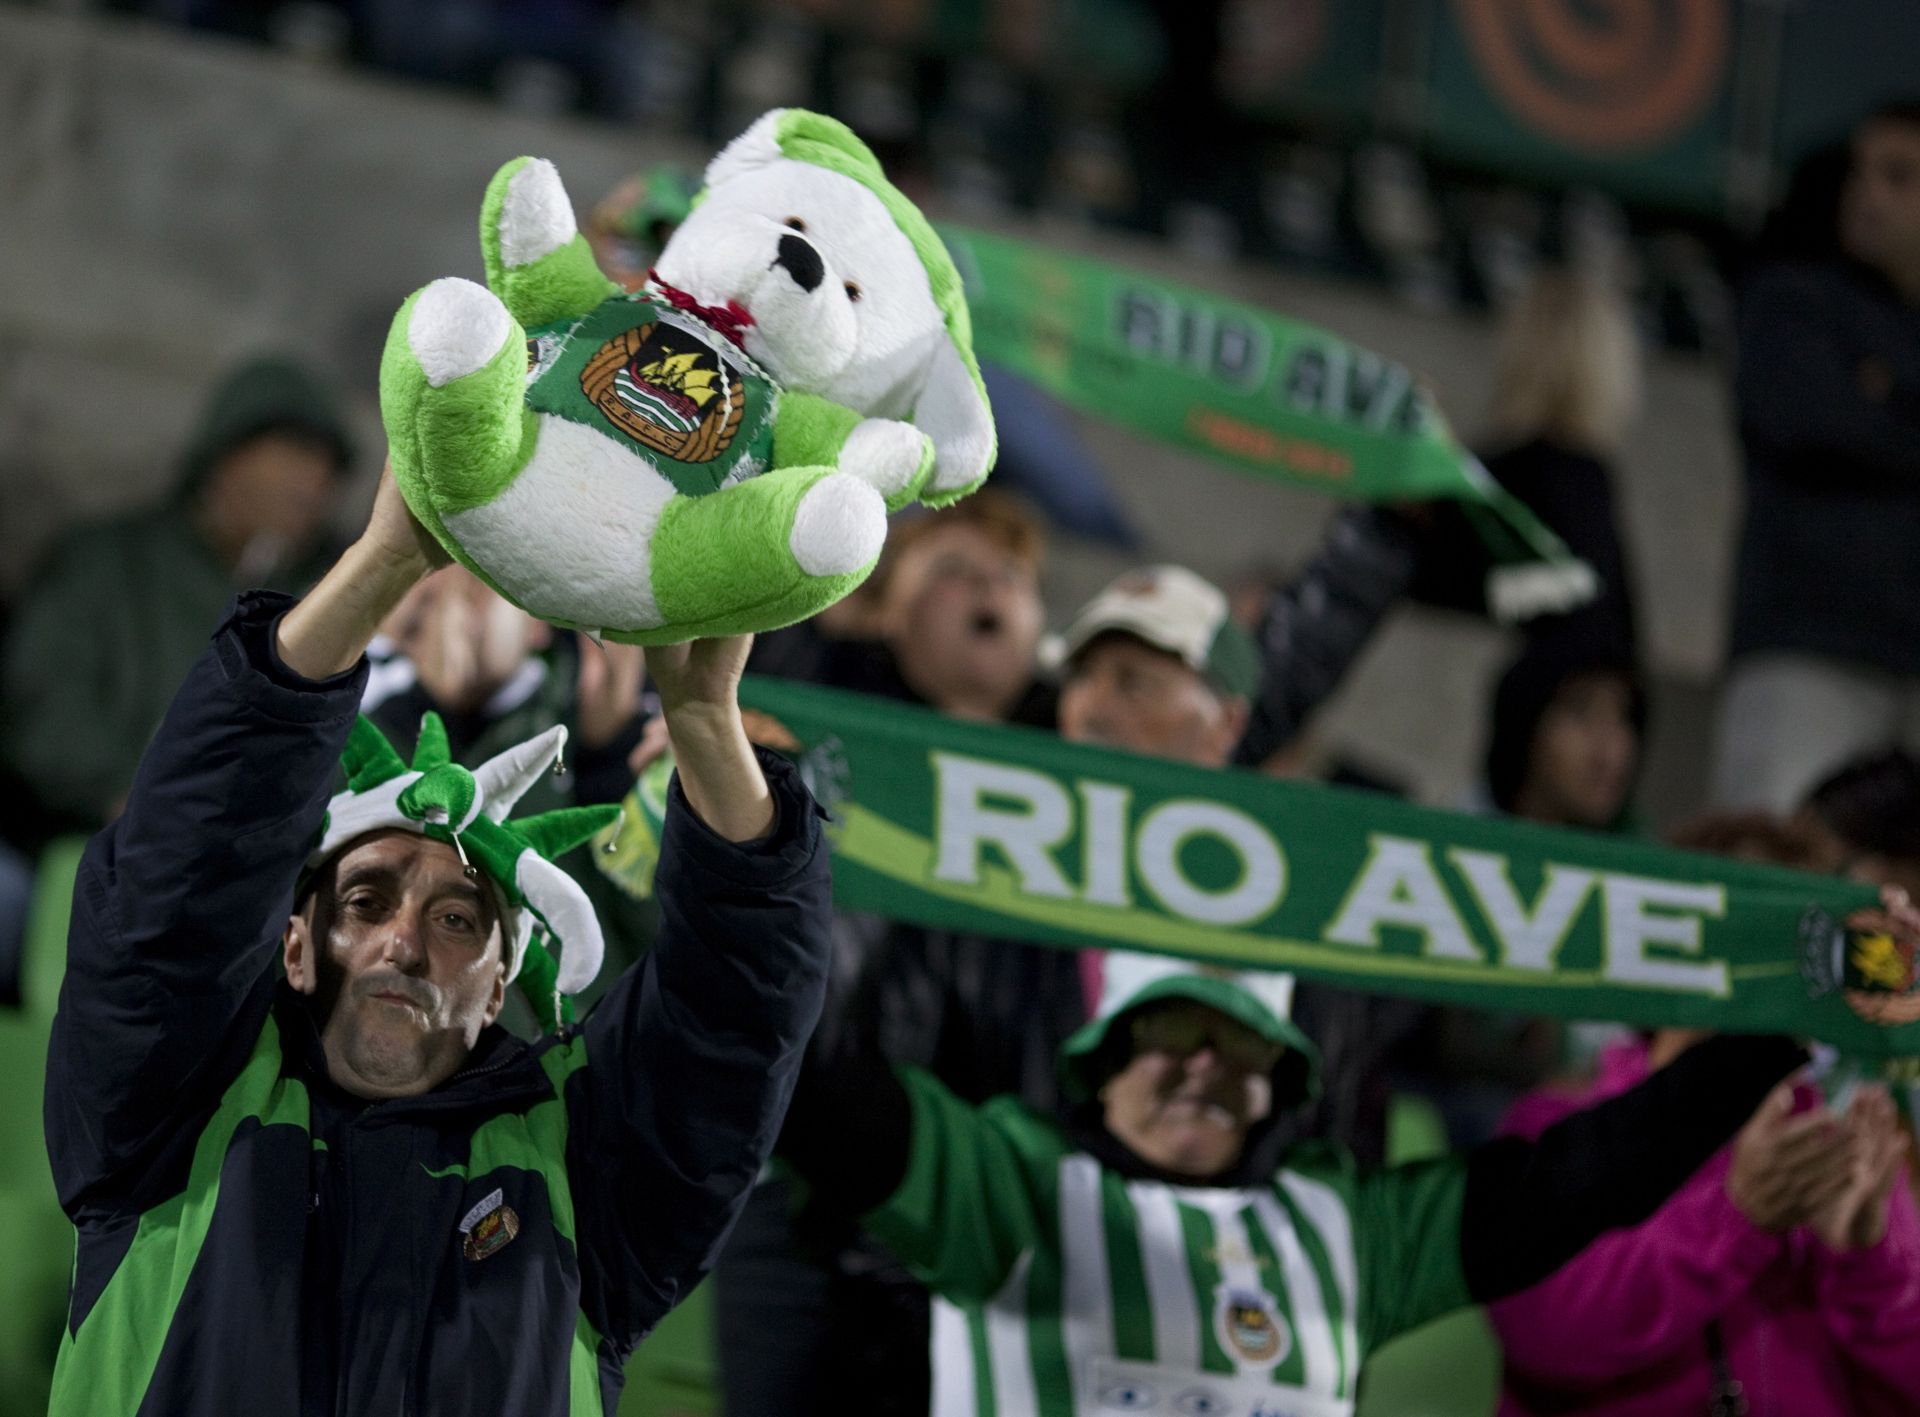 Rio Ave FC fans passionately support their team